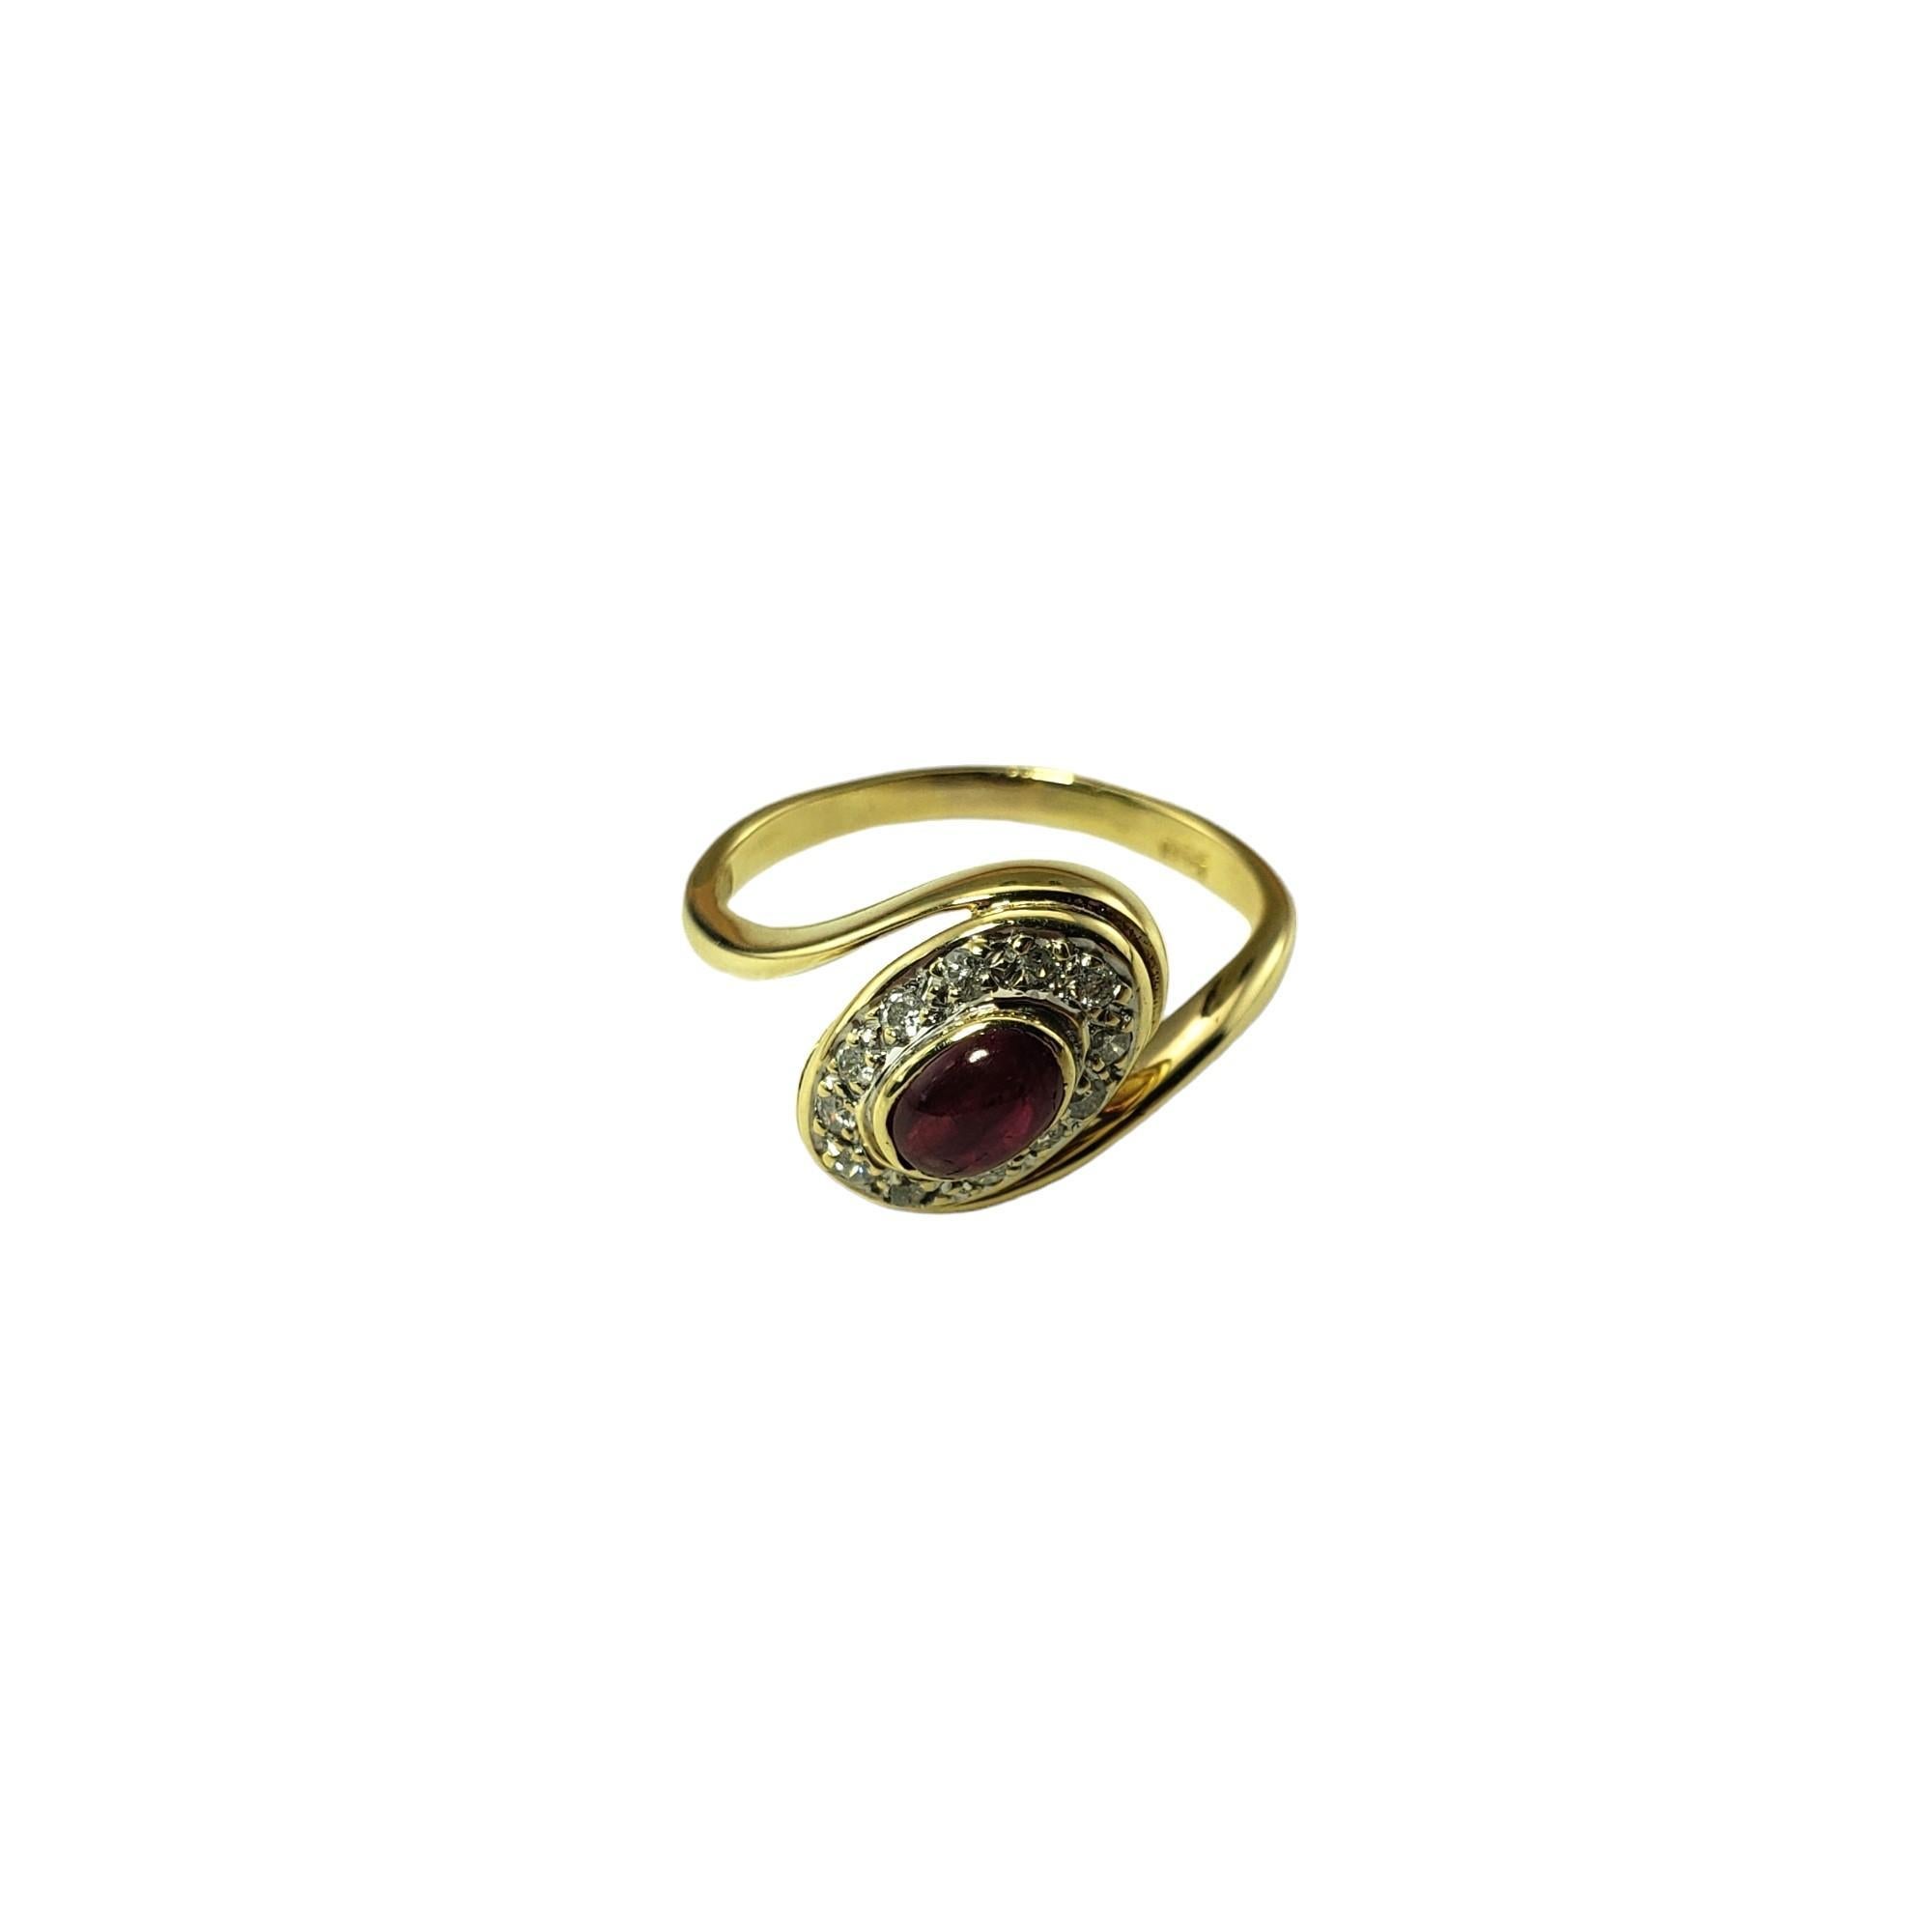 Vintage 14K Yellow Gold Ruby and Diamond Ring Size 5.25 JAGi Certified-

This elegant ring features one oval cabochon ruby (6 mm x 4 mm) and 12 round brilliant cut diamonds set in classic 14K yellow gold. Width: 12 mm.  Shank: 2 mm.

Ruby weight: